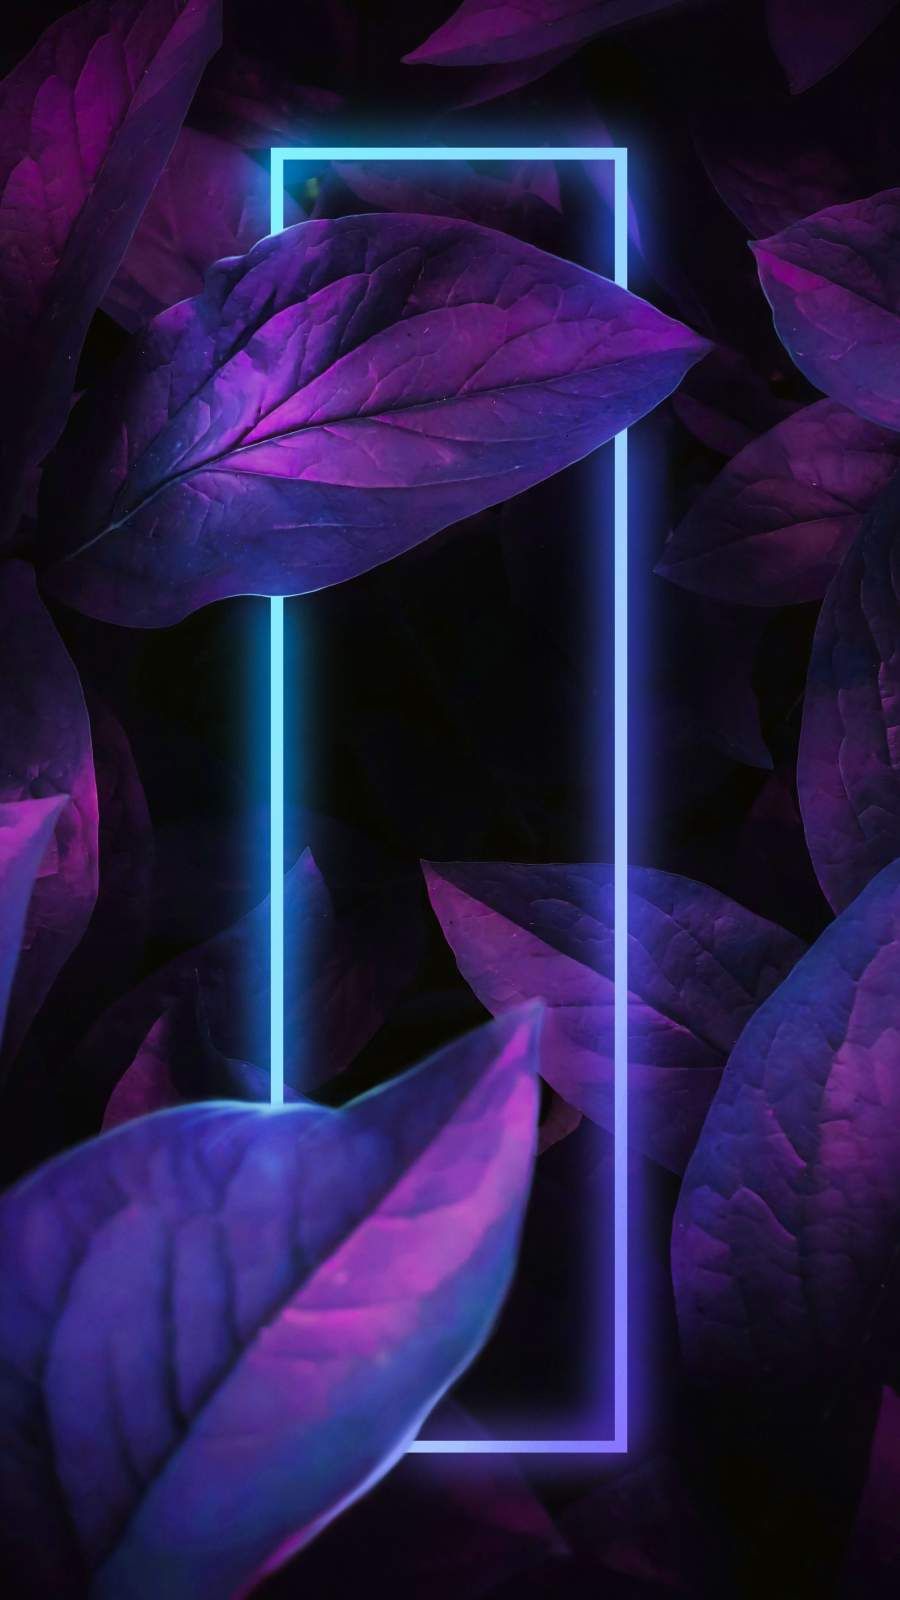 iPhone Wallpaper for iPhone iPhone iPhone X, iPhone XR, iPhone 8 Plus High Quality Wallp. Nature iphone wallpaper, iPhone wallpaper, Art wallpaper iphone